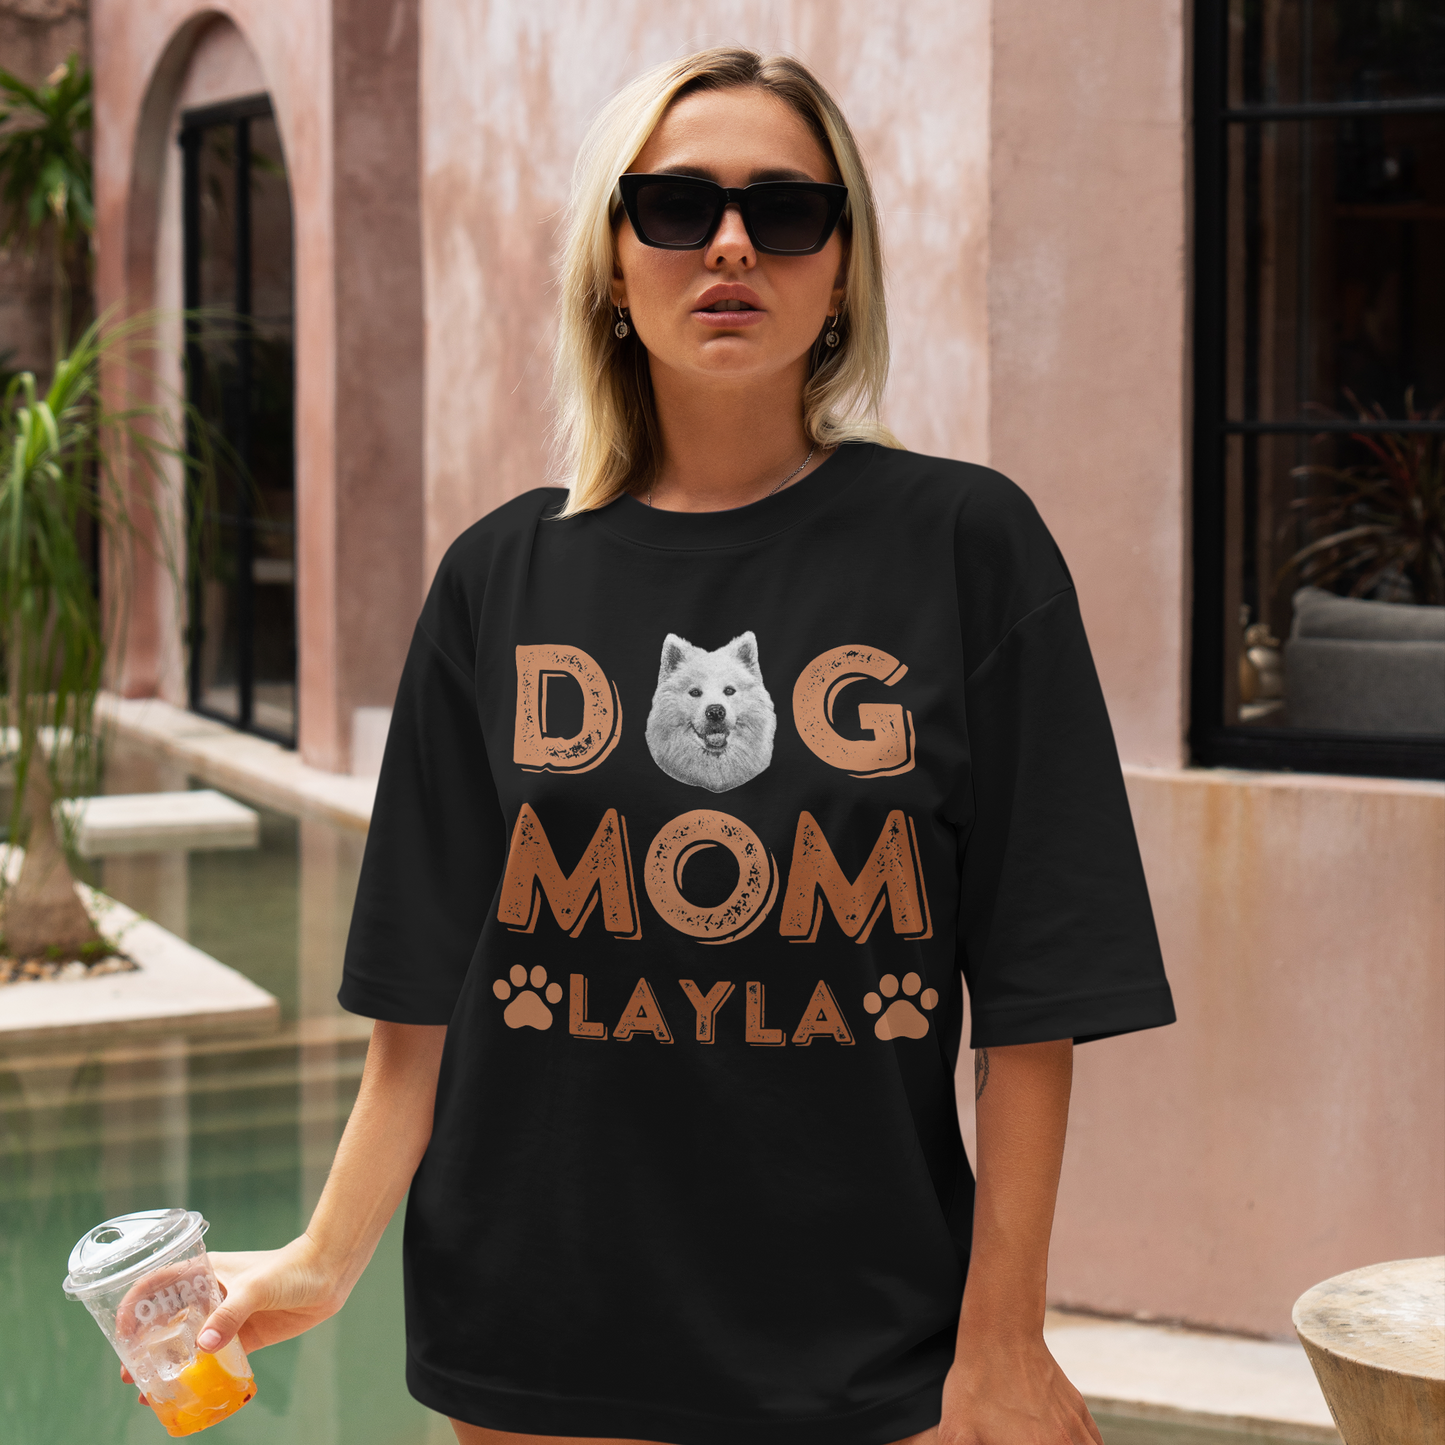 Dog Mom Shirt, Personalized Dog Shirt, Personalized Shirt For Mother's Day, Pet Mom Gift Idea, Customized Dog's Name Shirt, Gift Idea Shirt For Dog Lovers, Lovely Shirt For Who Loves Dog, Cute Retro Dog Mom Shirt, Gift For Dog Holic